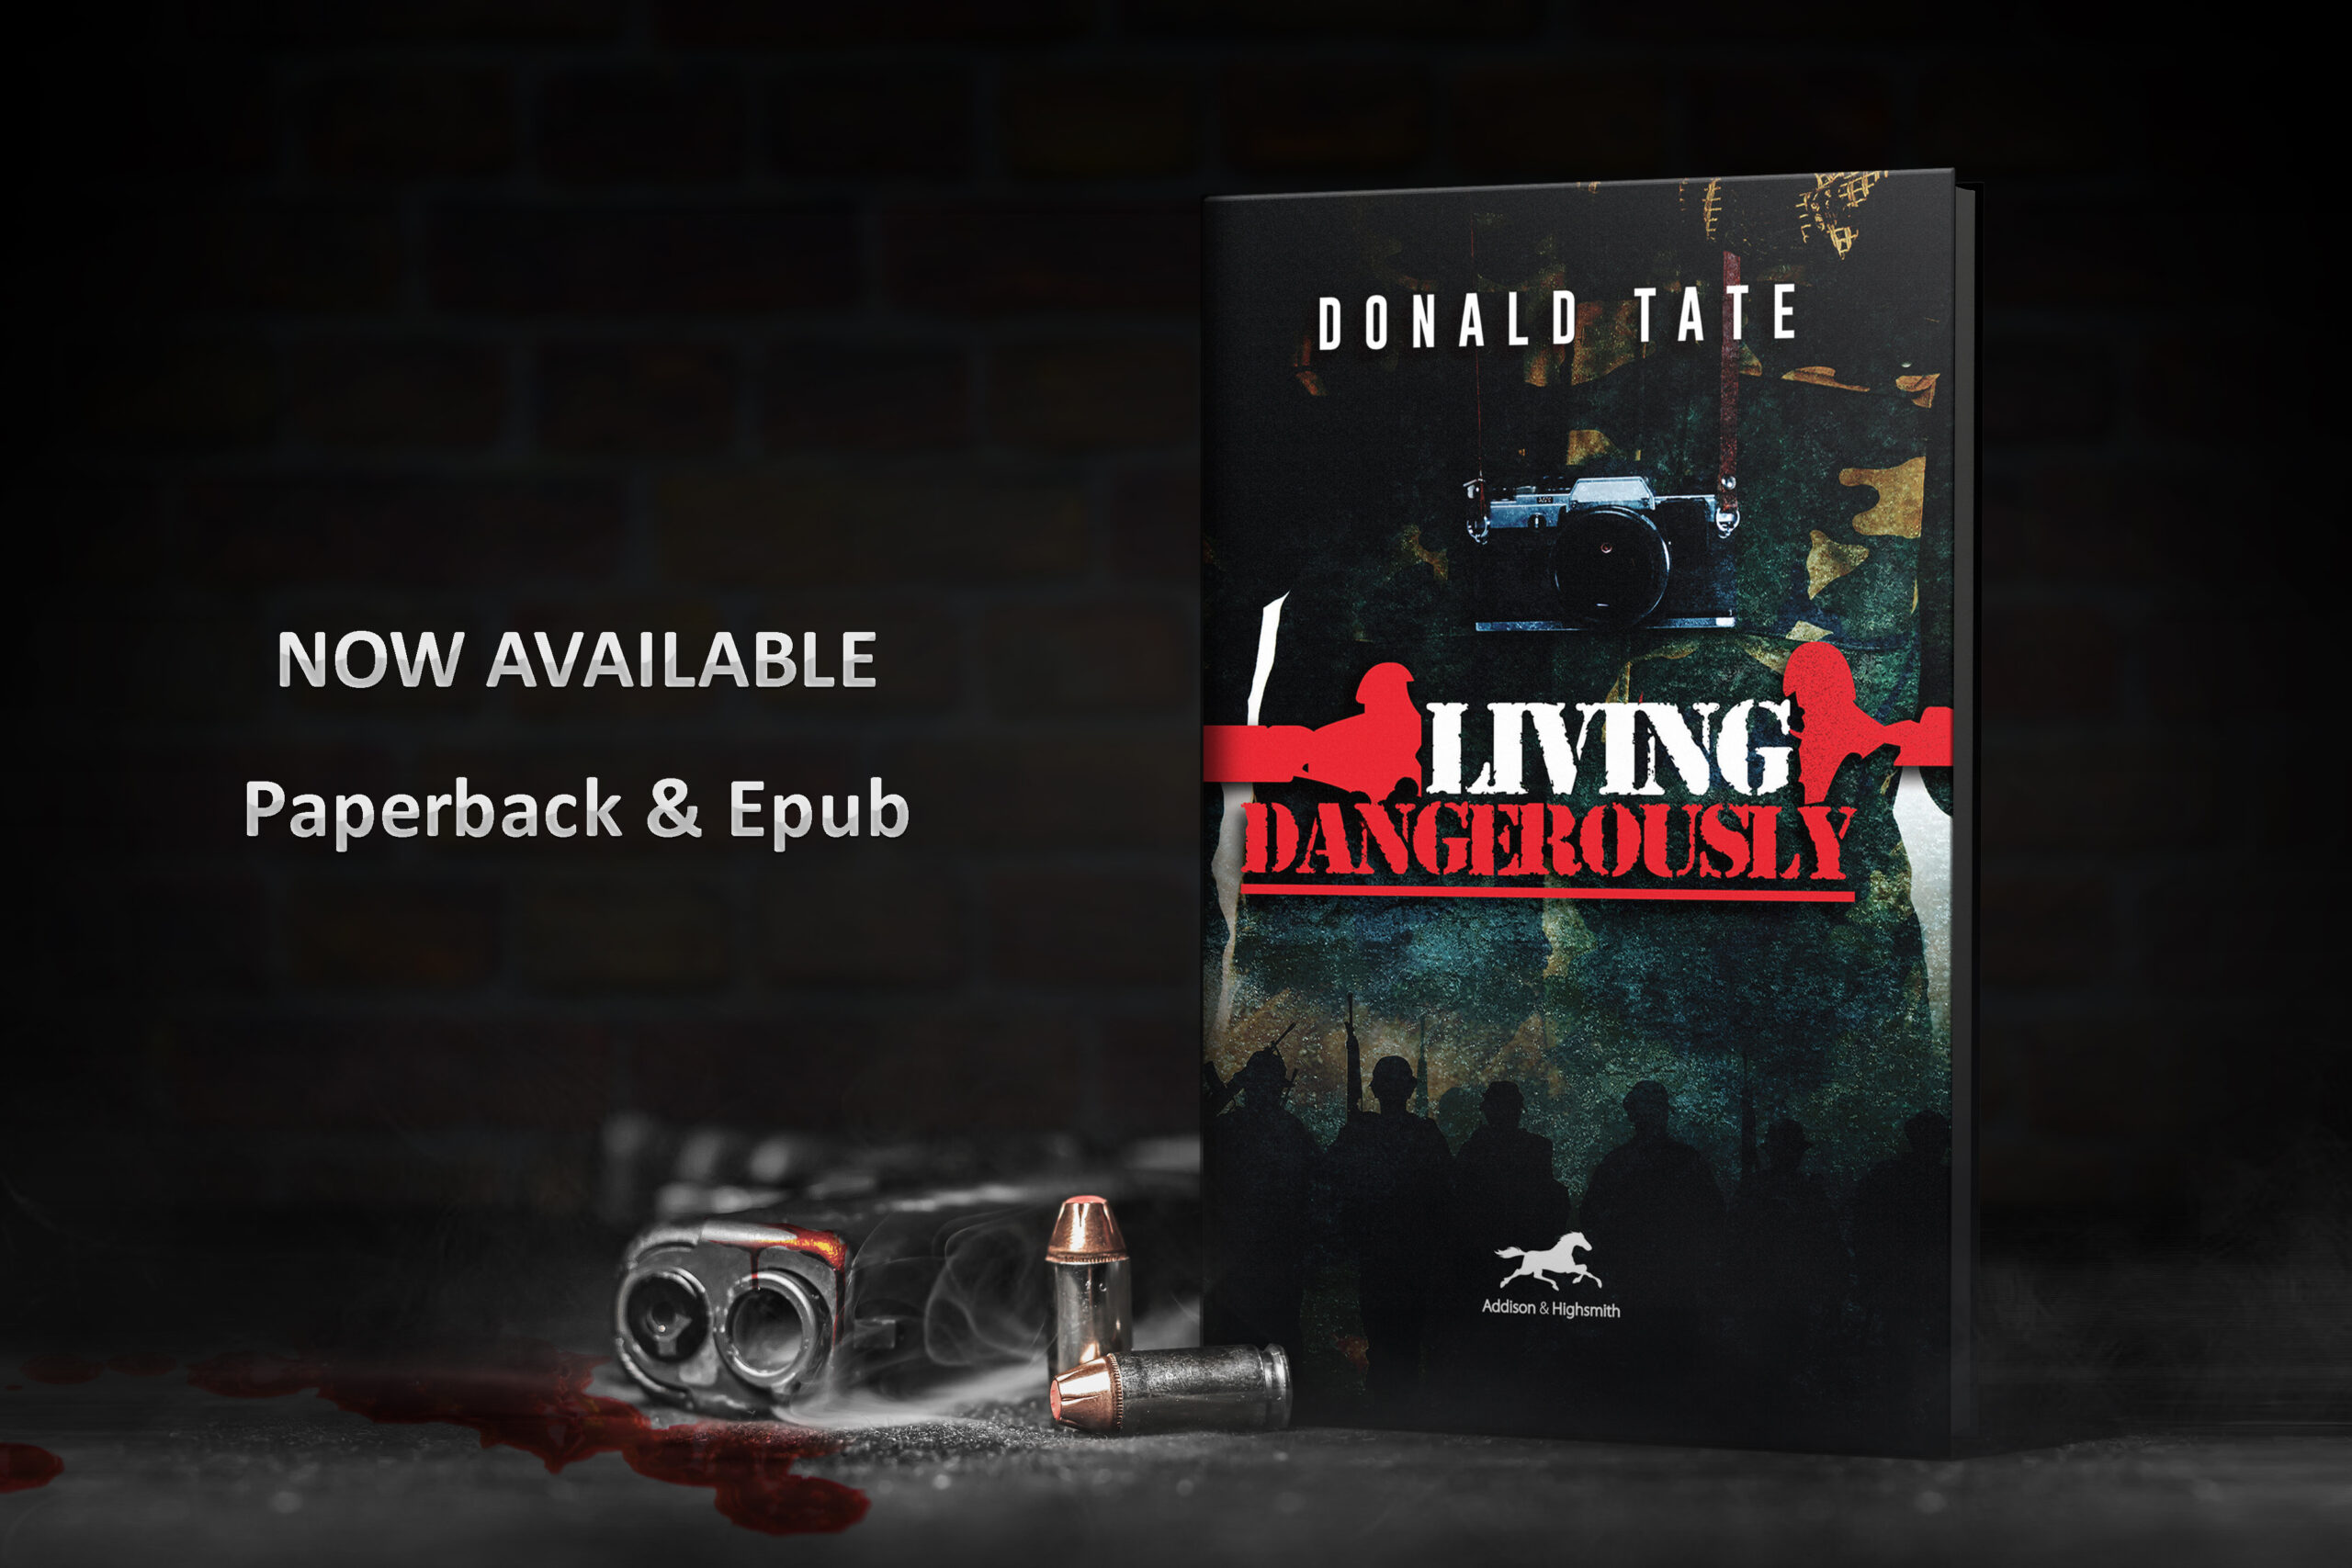 Living Dangerously by Donald Tate